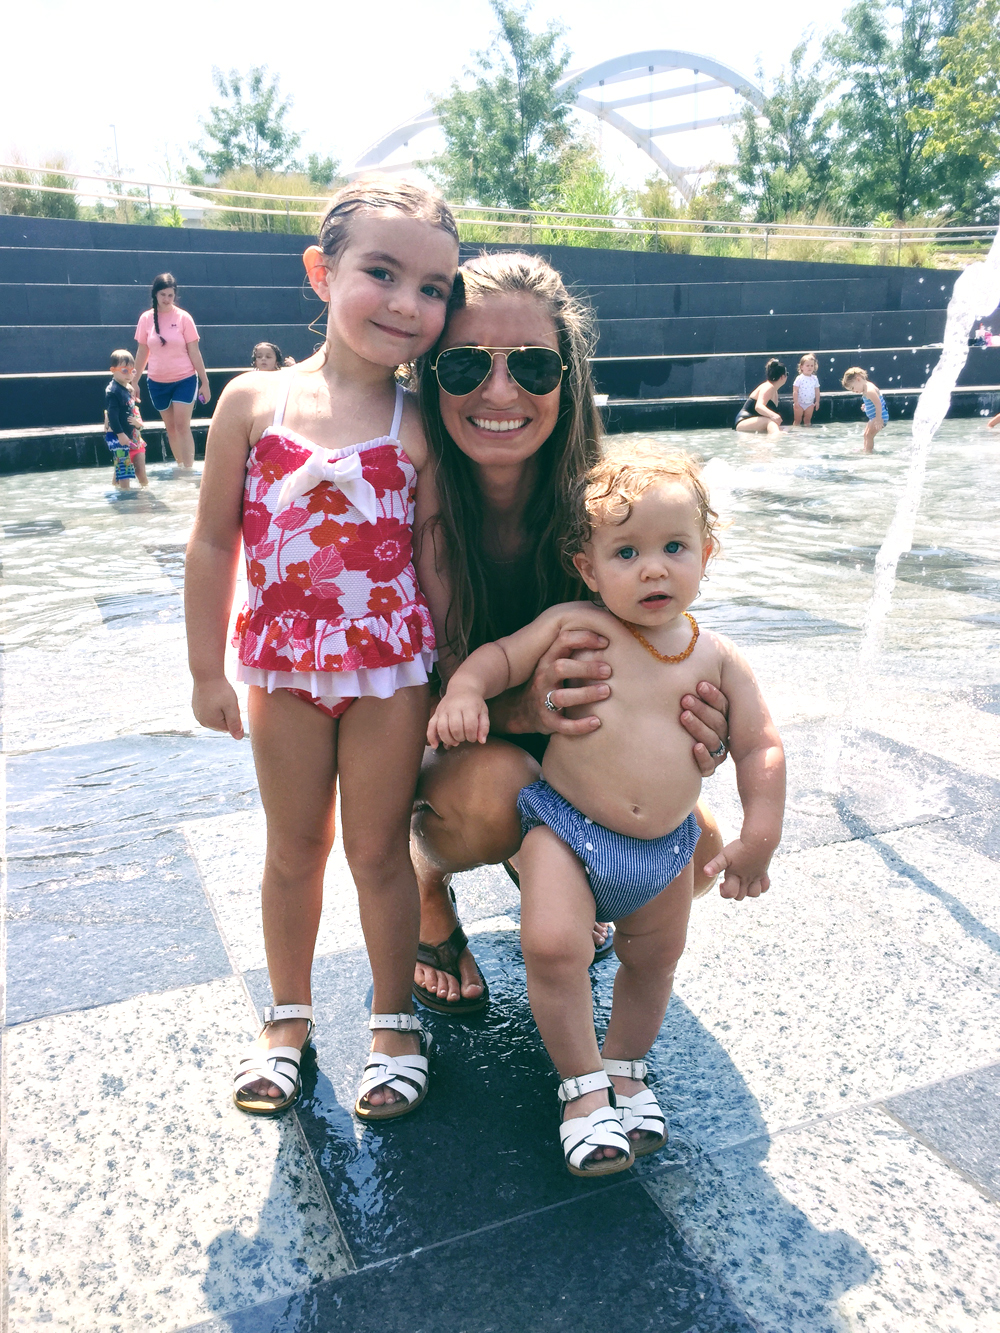 downtown splash pad with friends!